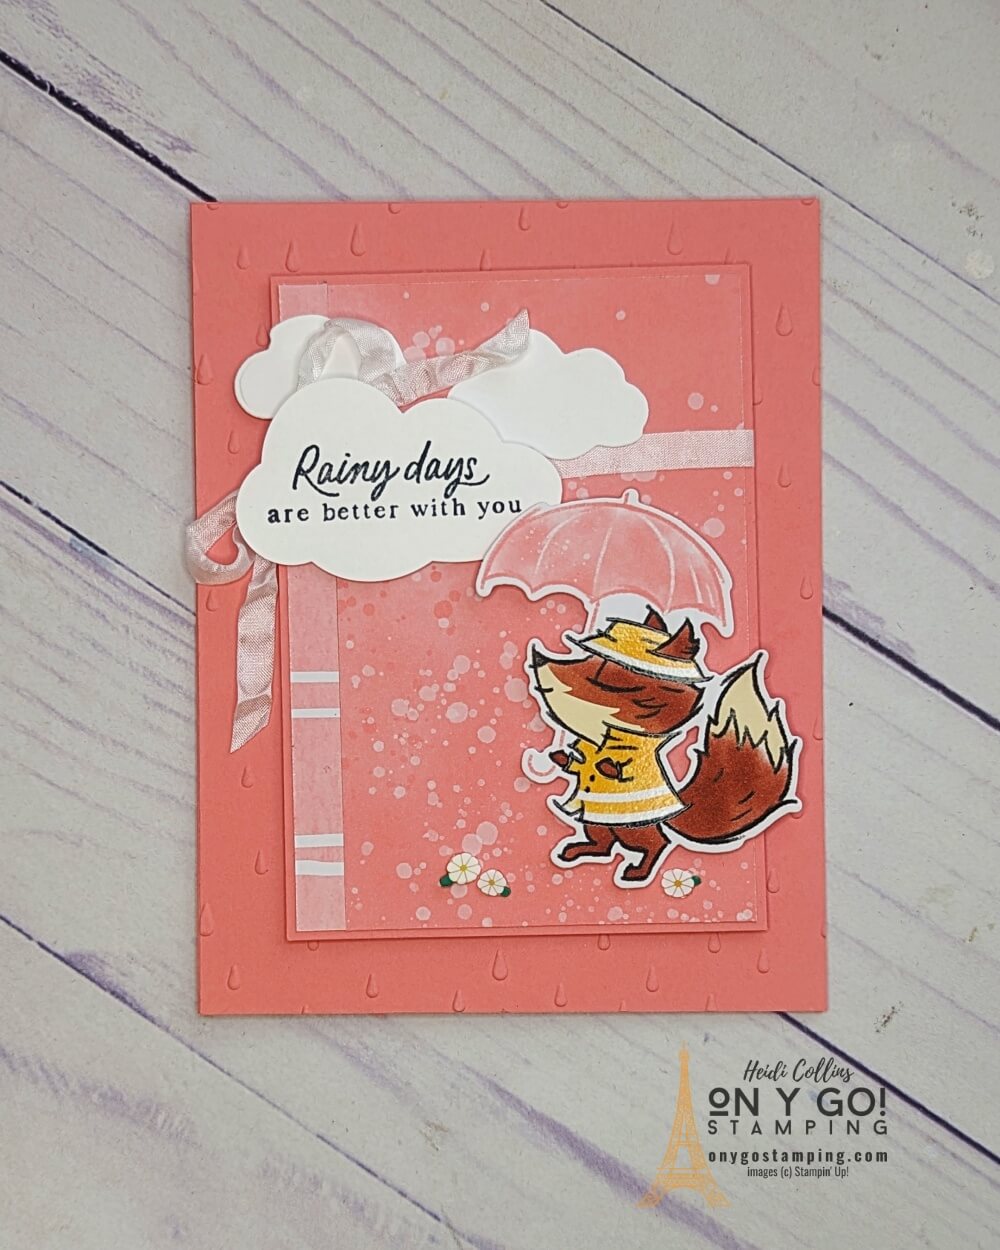 Playing in the Rain stamp set from Stampin' Up! is perfect for adding a cheerful touch to any rainy day. This handmade card set is perfect for inspiring the imagination and brightening those gloomy days. Make a special card or letter for that special someone with this fun, creative set!